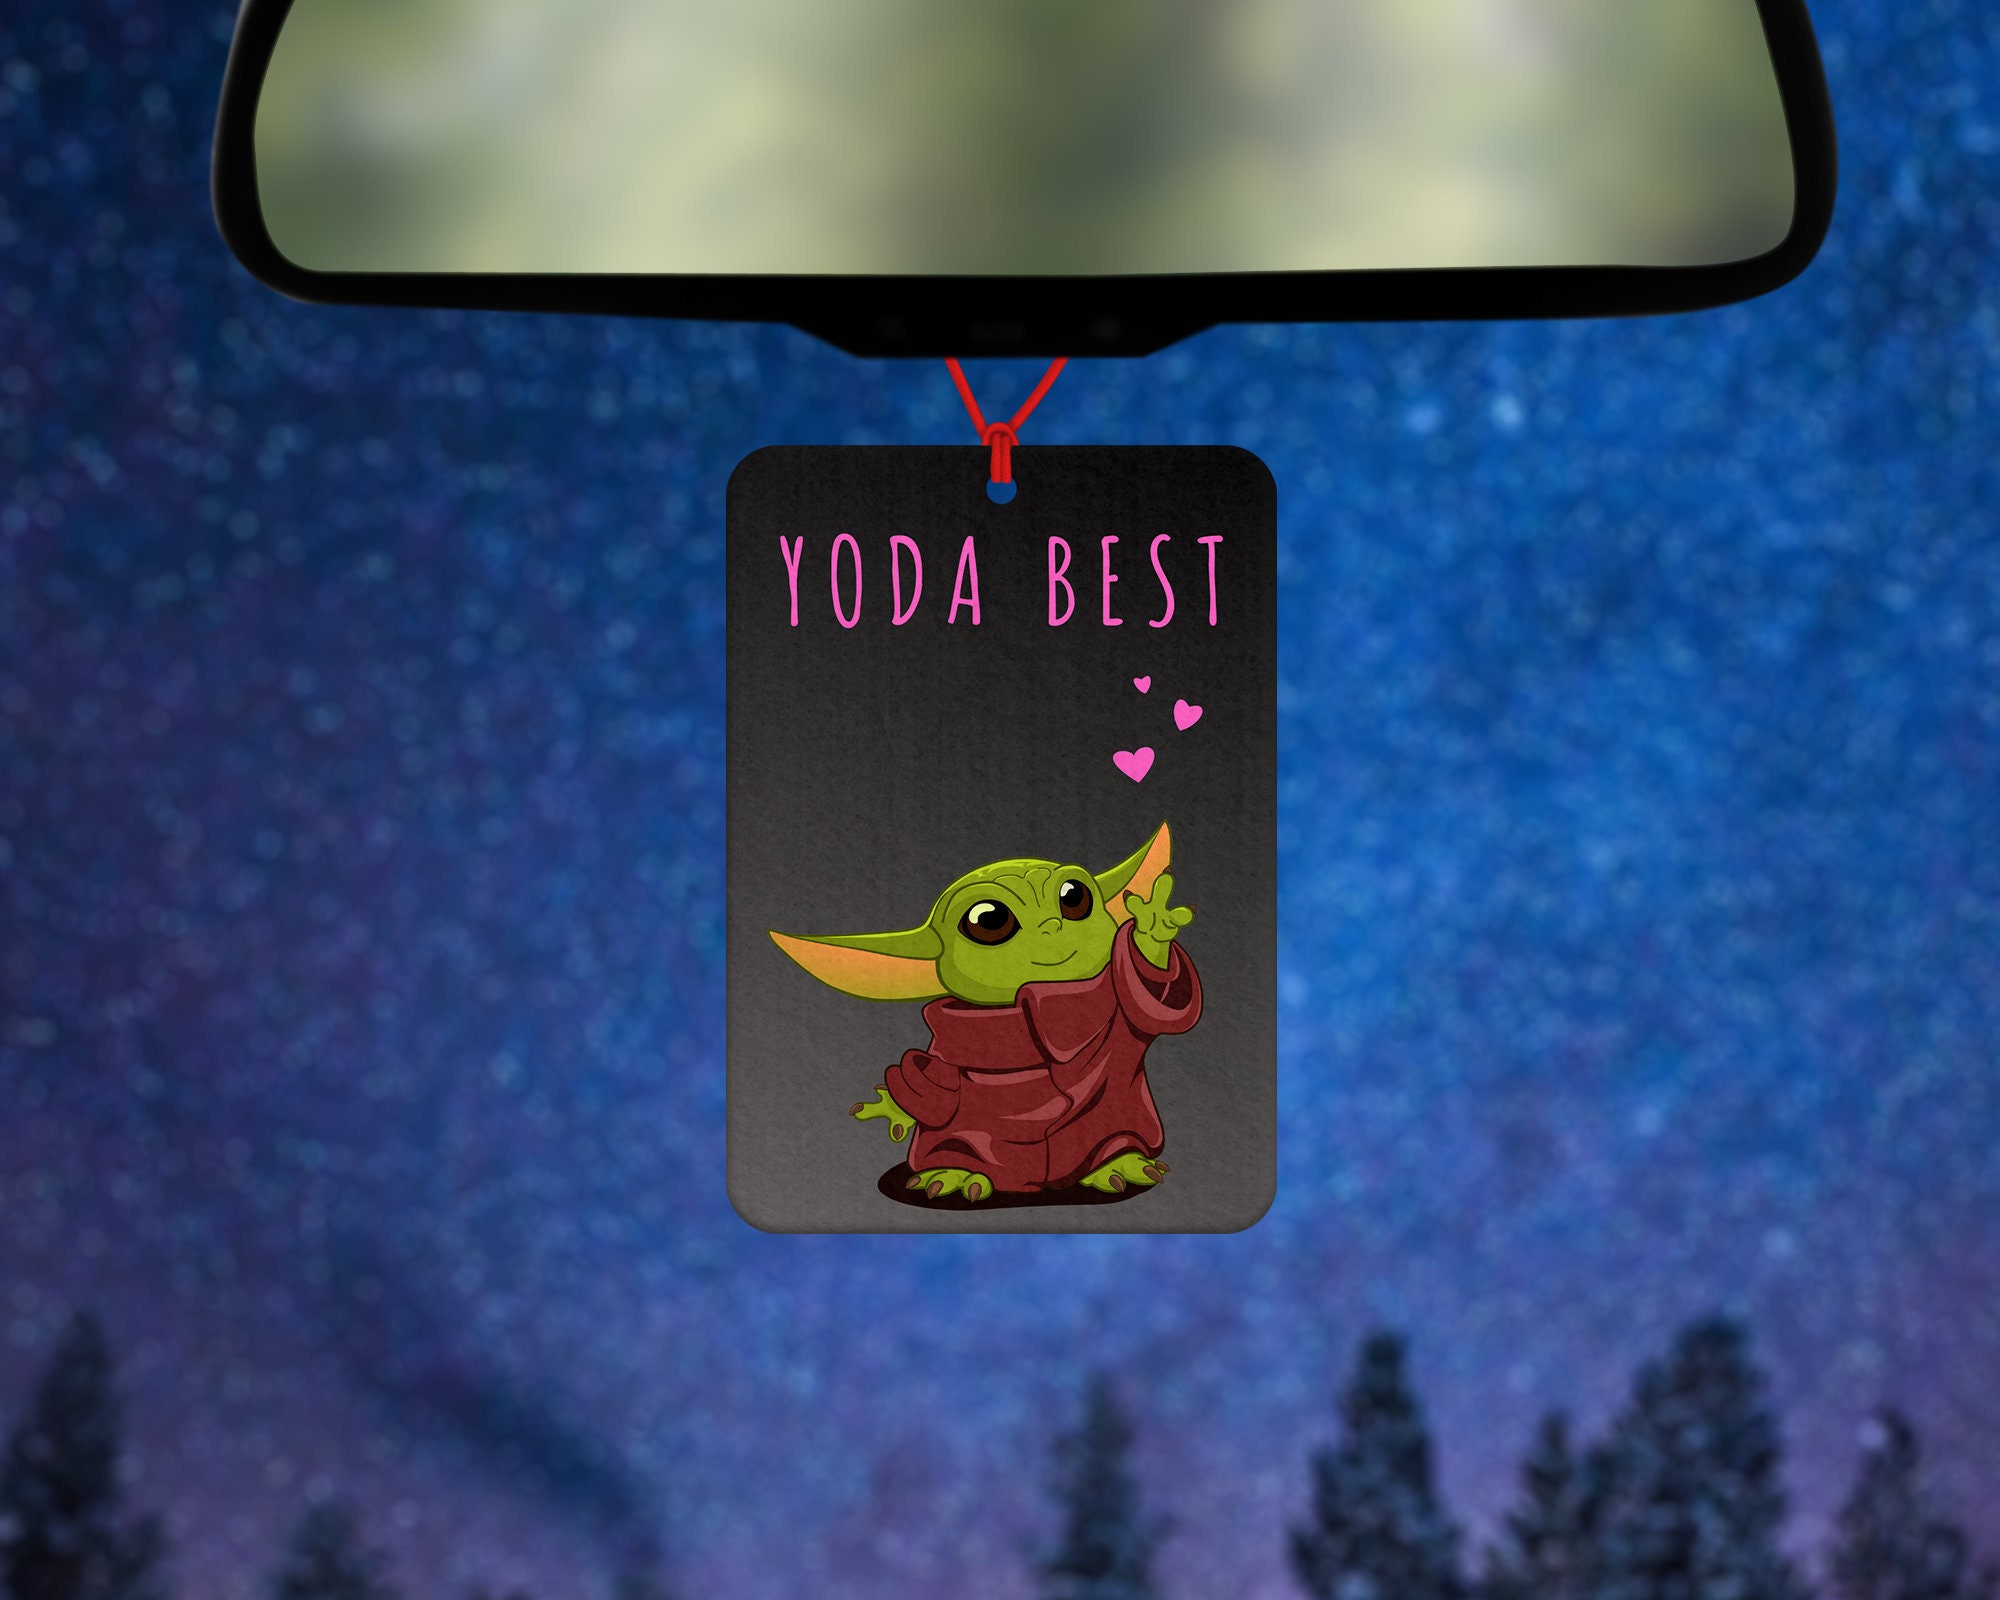 Star Wars Baby Yoda Figure Car Rearview Mirror Hanging Ornament